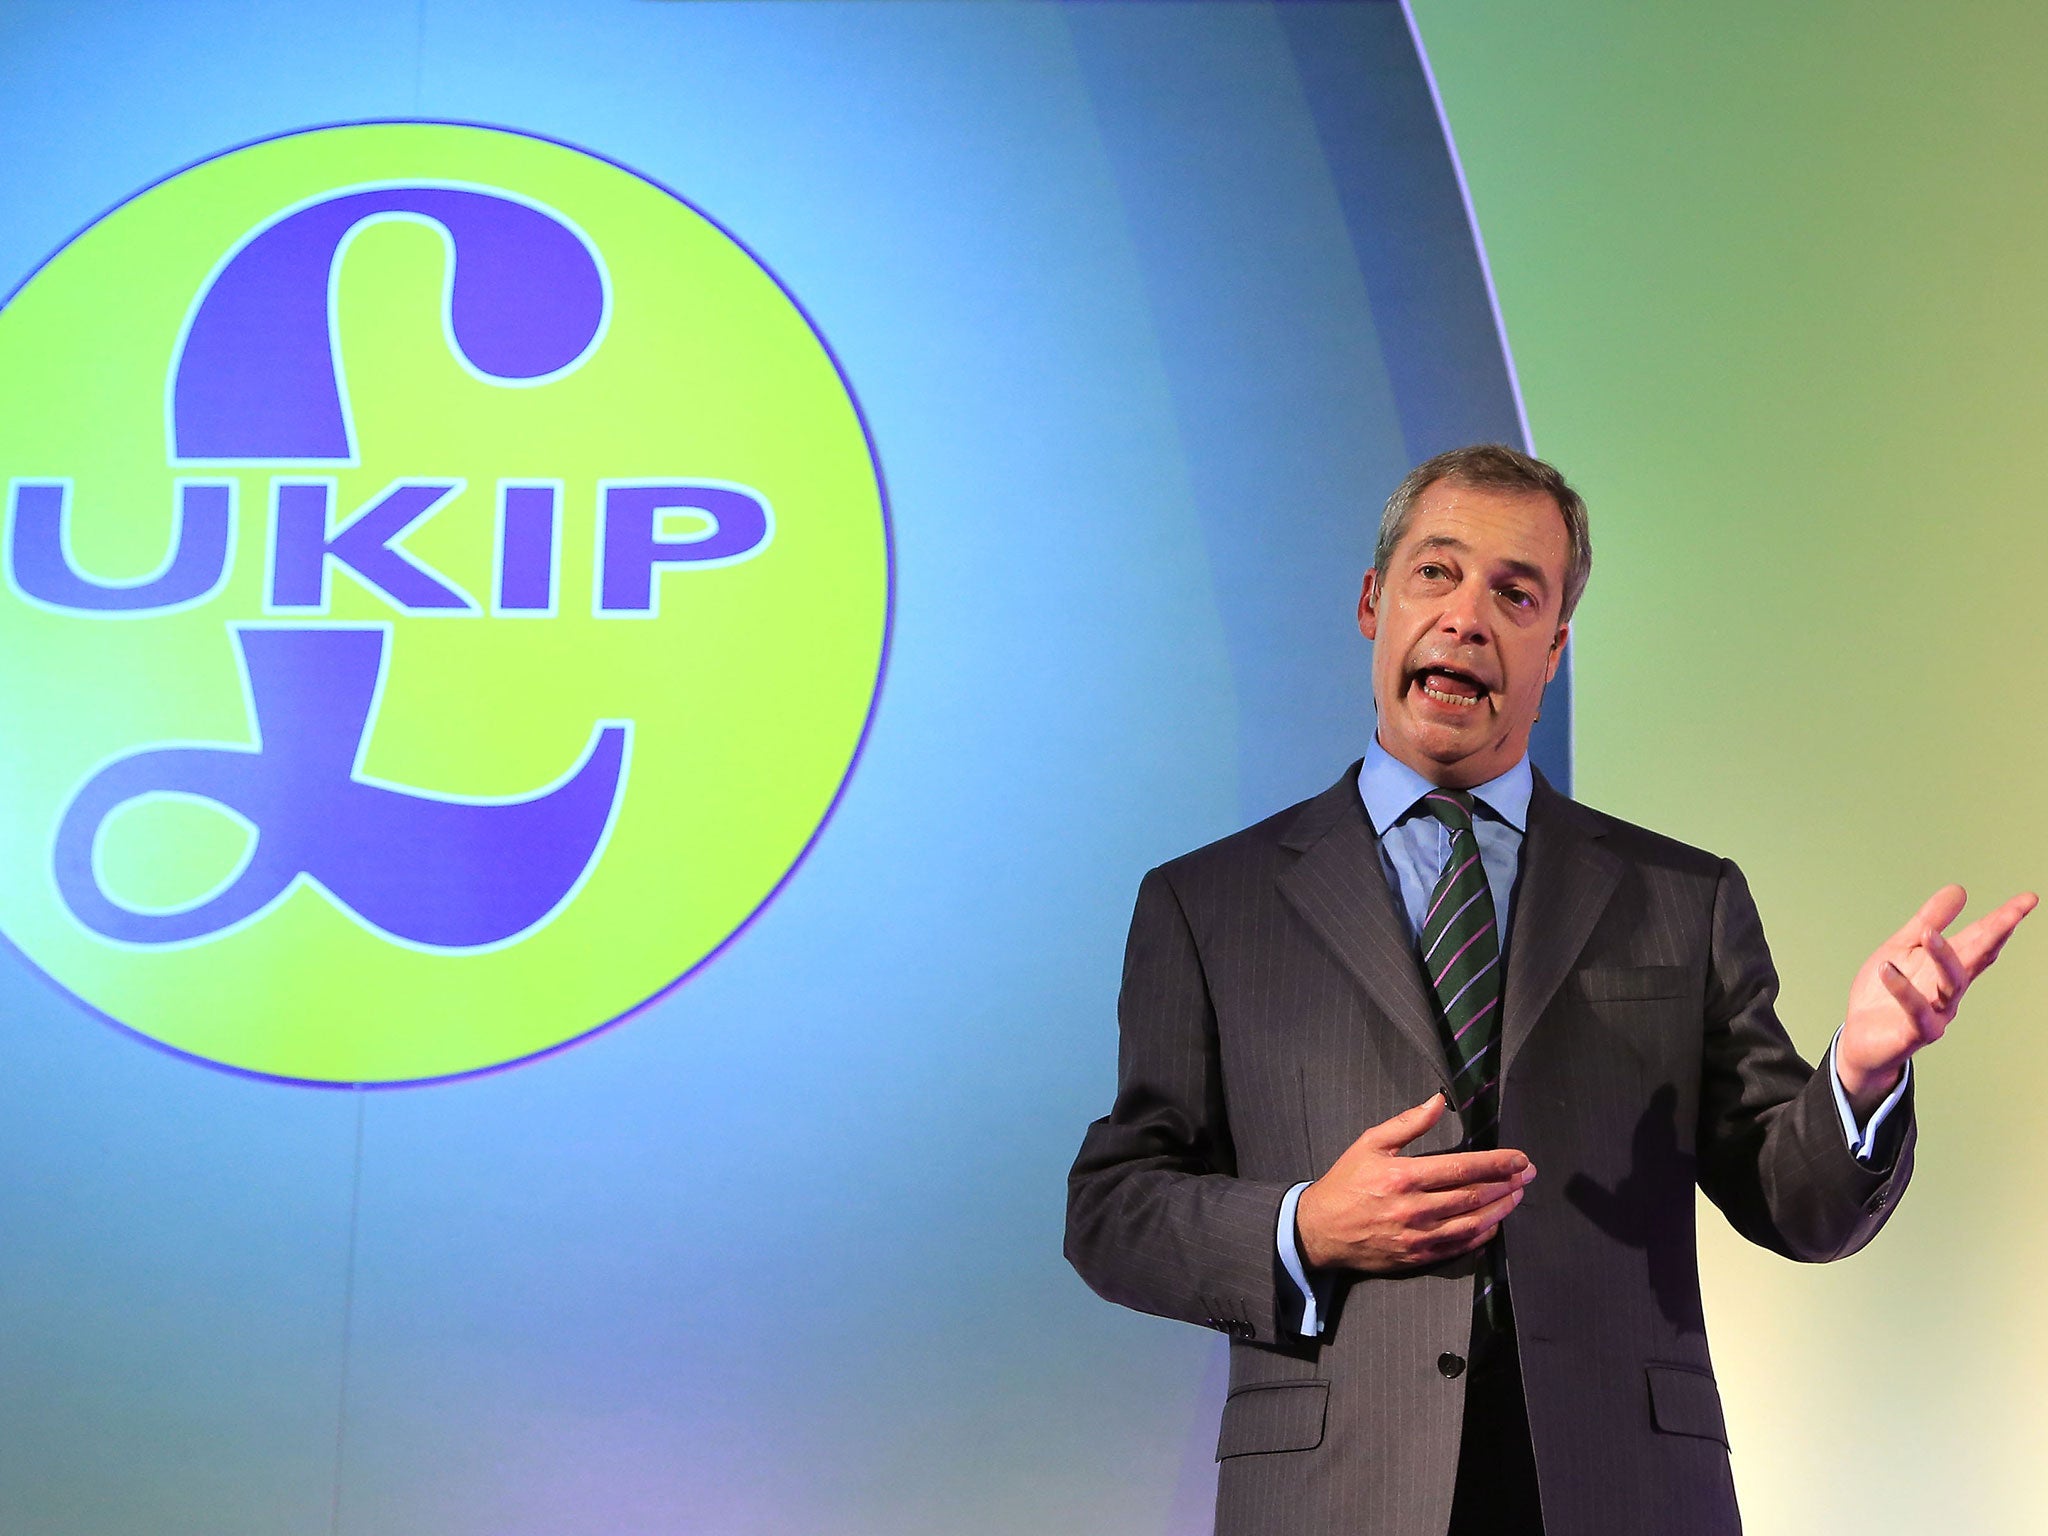 Ukip leader Nigel Farage delivers his key note speech during the Ukip annual conference at Doncaster racecourse in South Yorkshire